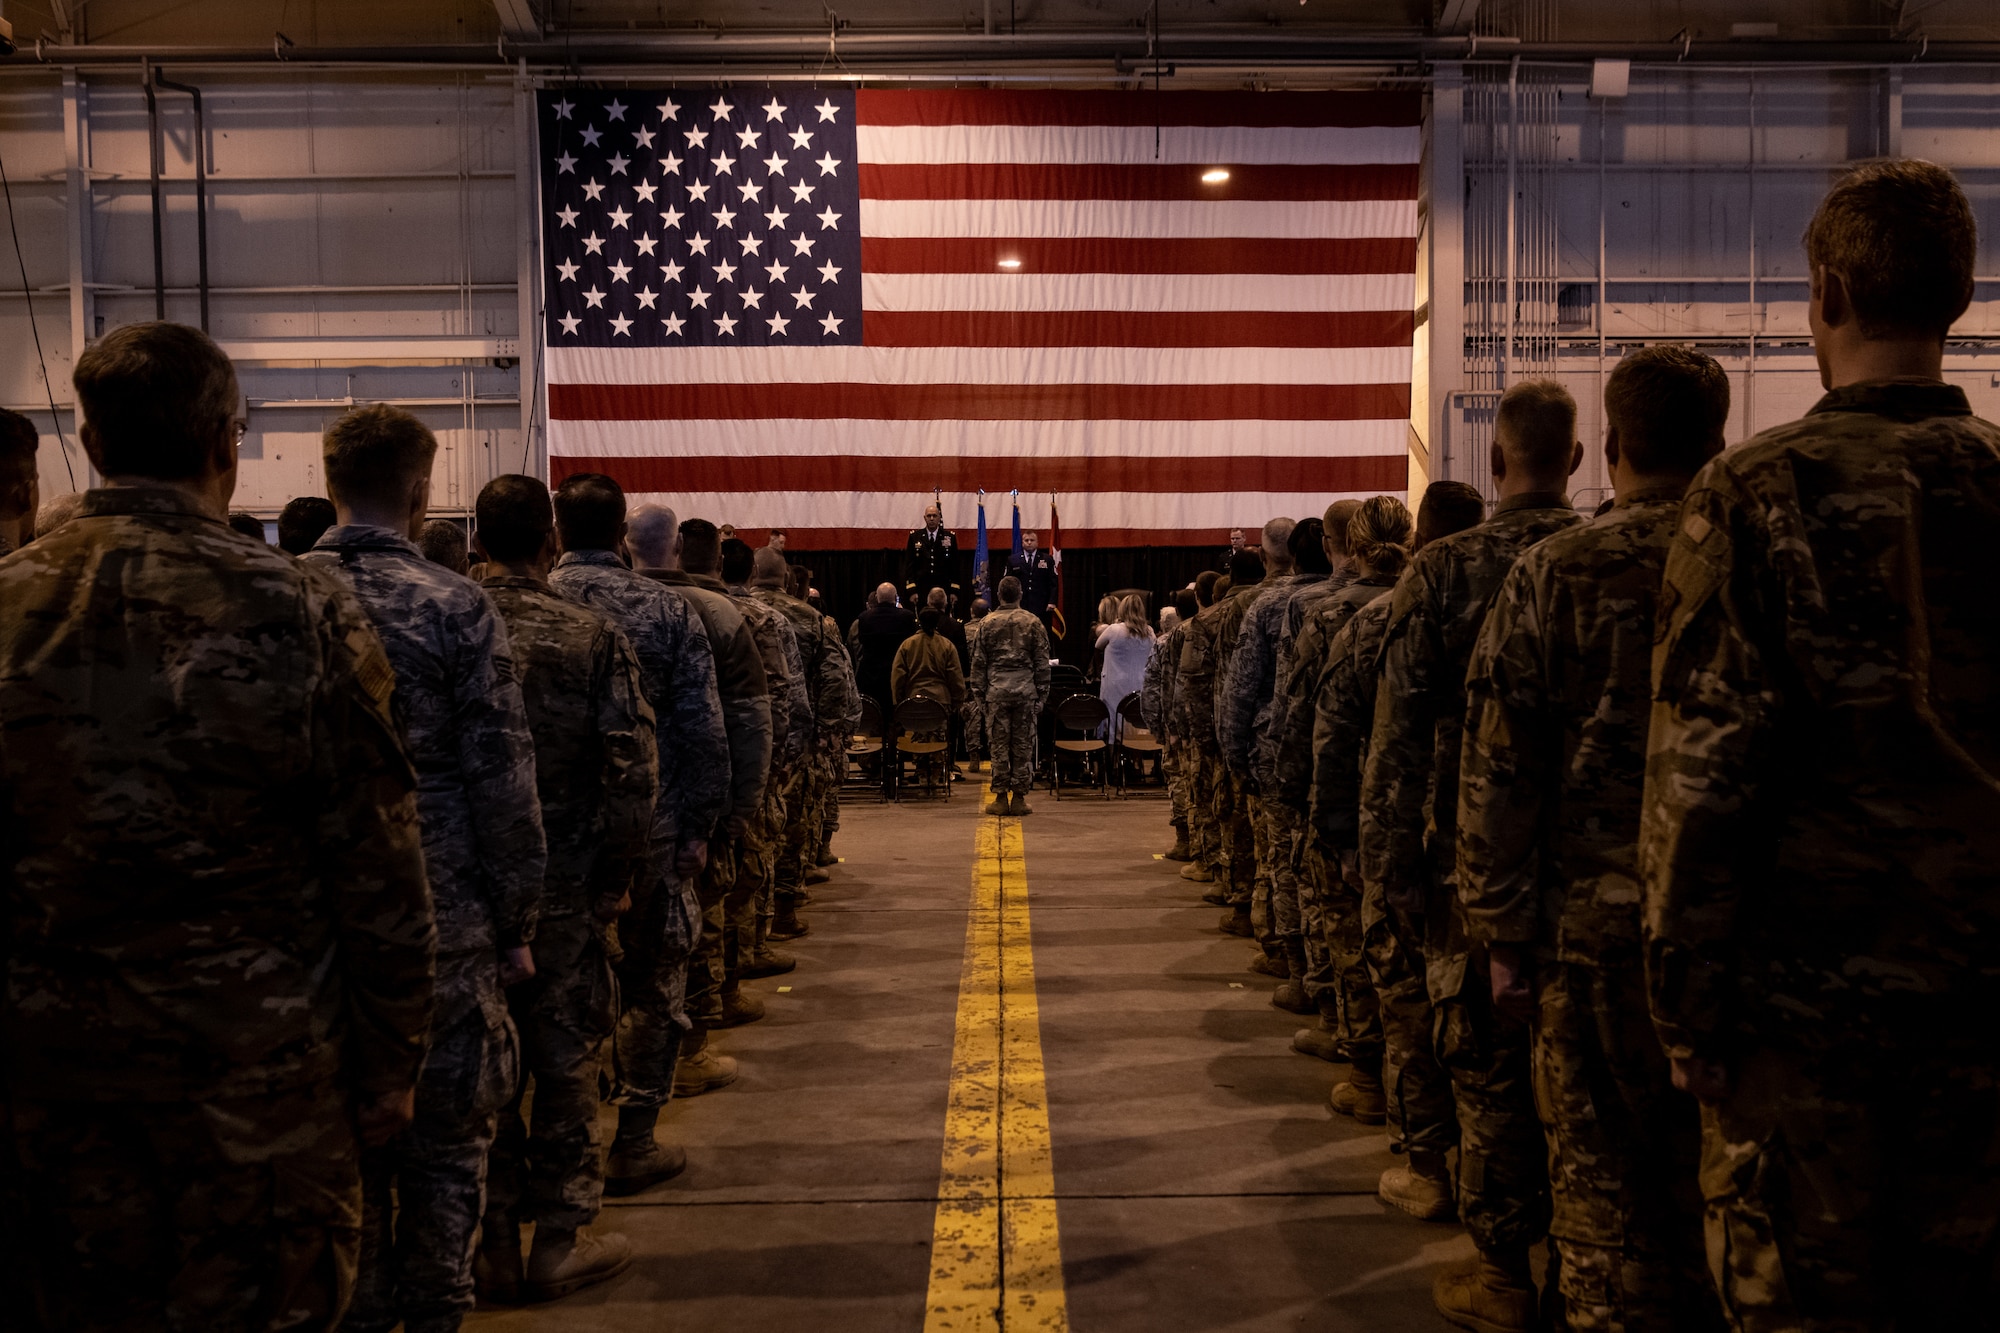 Members of the 137th Special Operations Wing stand at attention and observe as Master Sgt. Bryan Whittle, assigned to the 205th Engineering and Installation Squadron, is presented with the Airman’s Medal during a ceremony at Will Rogers Air National Guard Base in Oklahoma City, Dec. 8, 2019. The Airman’s Medal is the highest noncombat award given in the Air Force and awarded to service members who distinguish themselves by a heroic act, usually at the voluntary risk of their own life. (U.S. Air National Guard photo by Staff Sgt. Brigette Waltermire)